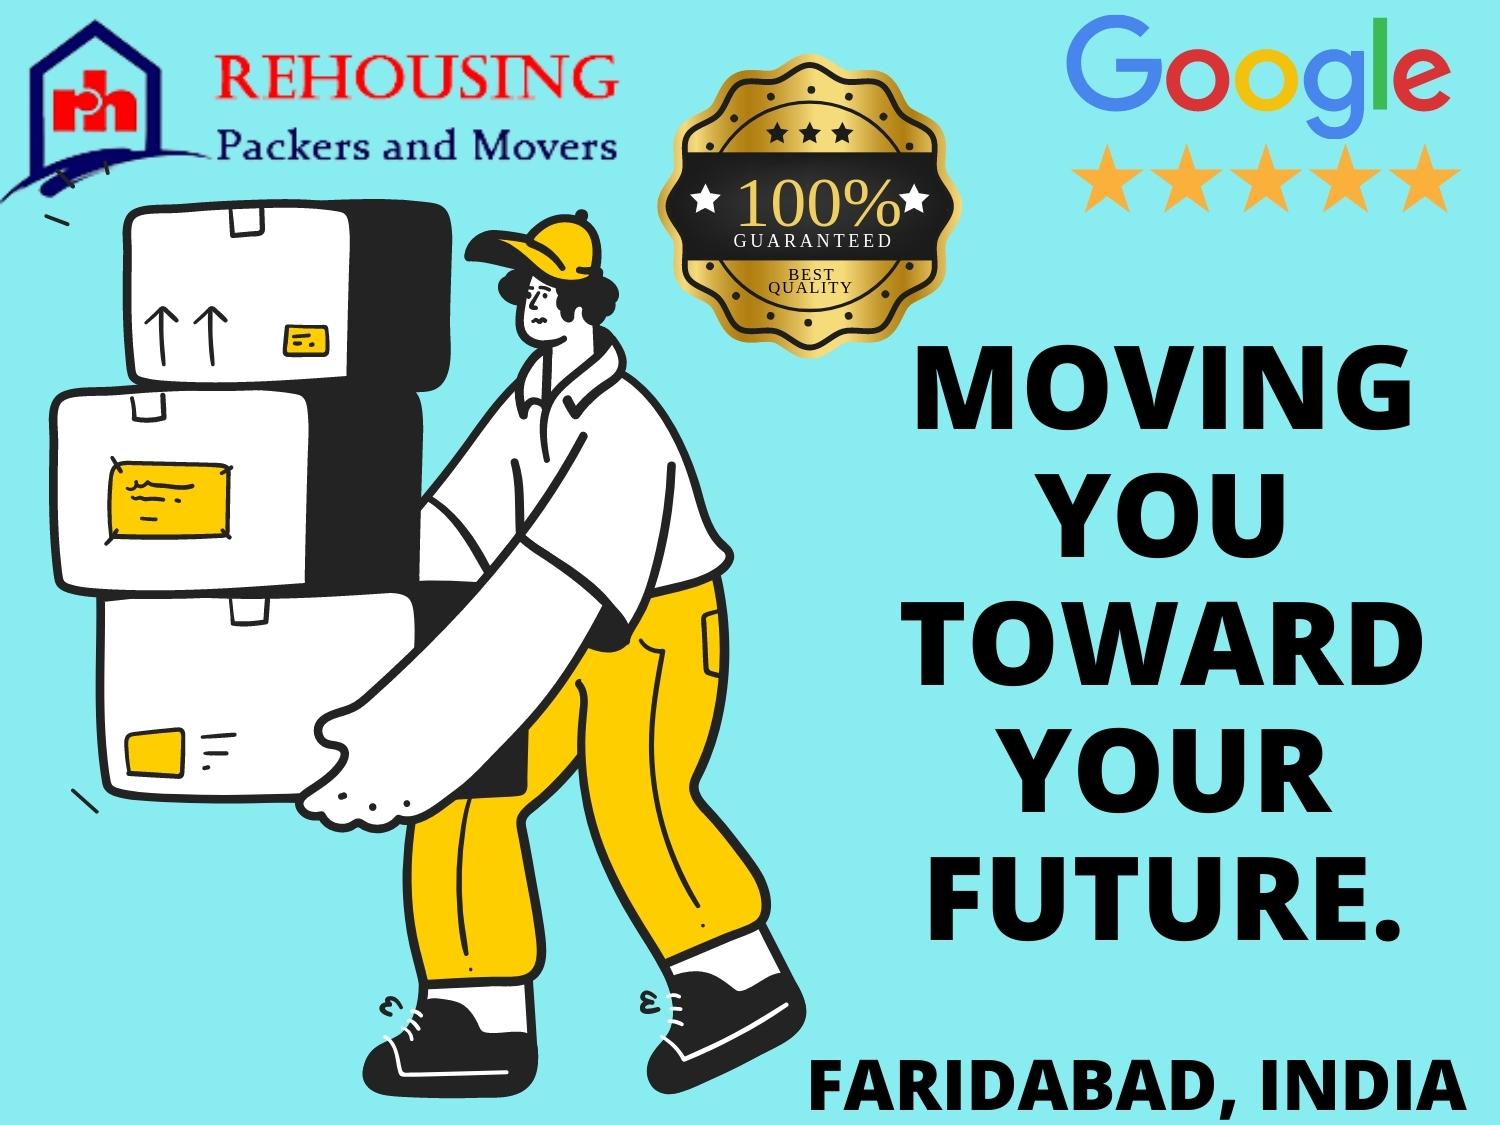 about the working of packers and movers in Faridabad